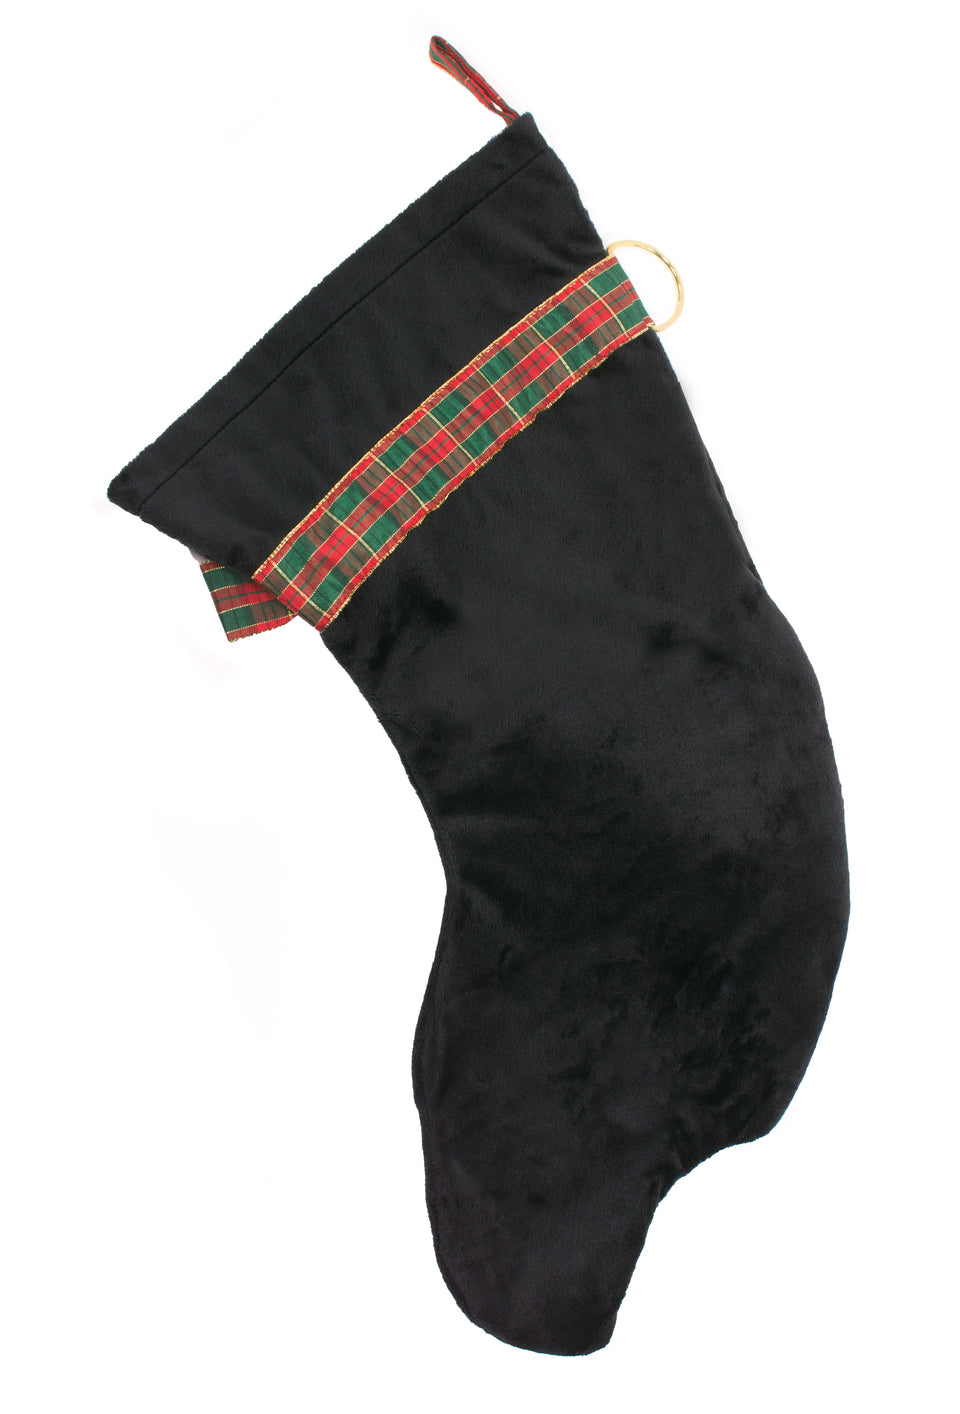 This Black Lab dog shaped Christmas stocking is perfect for stuffing toys and treats into to spoil your fur baby for Christmas, or whatever holiday you celebrate!